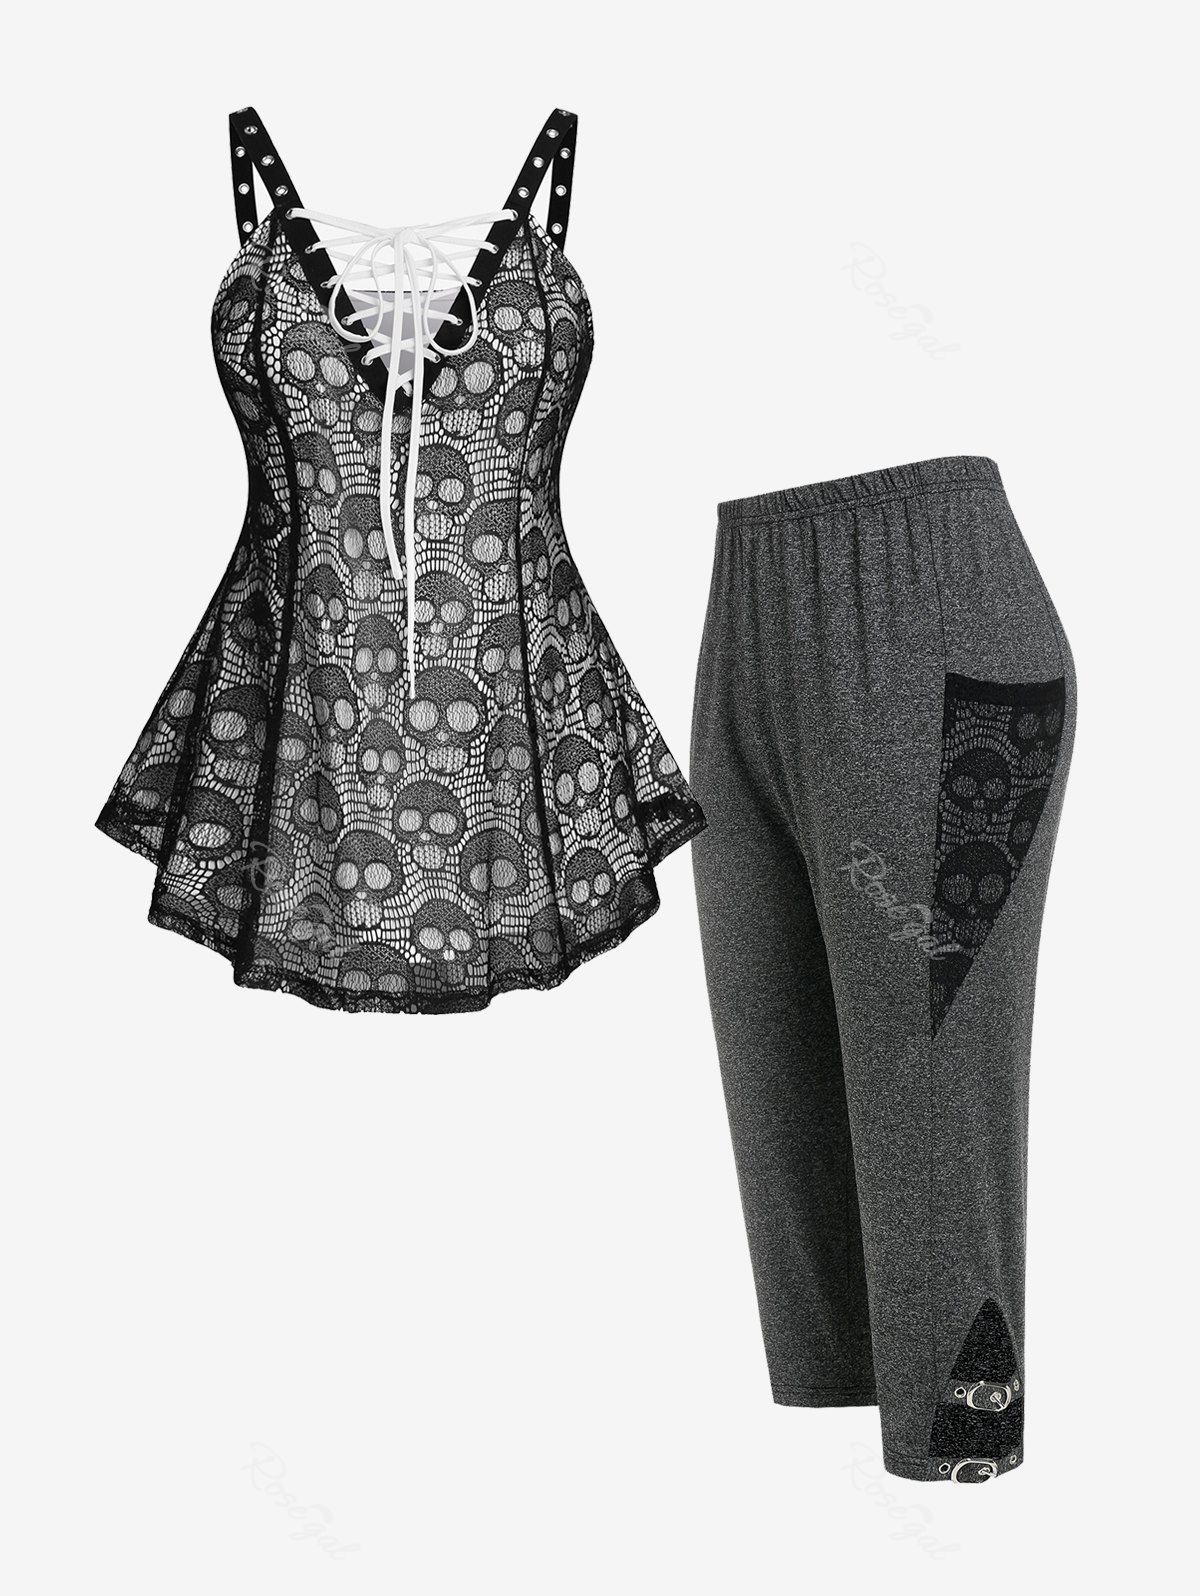 Fancy Lace Skull Grommet Tank Top and Buckle Cutout Leggings Plus Size Summer Outfit  